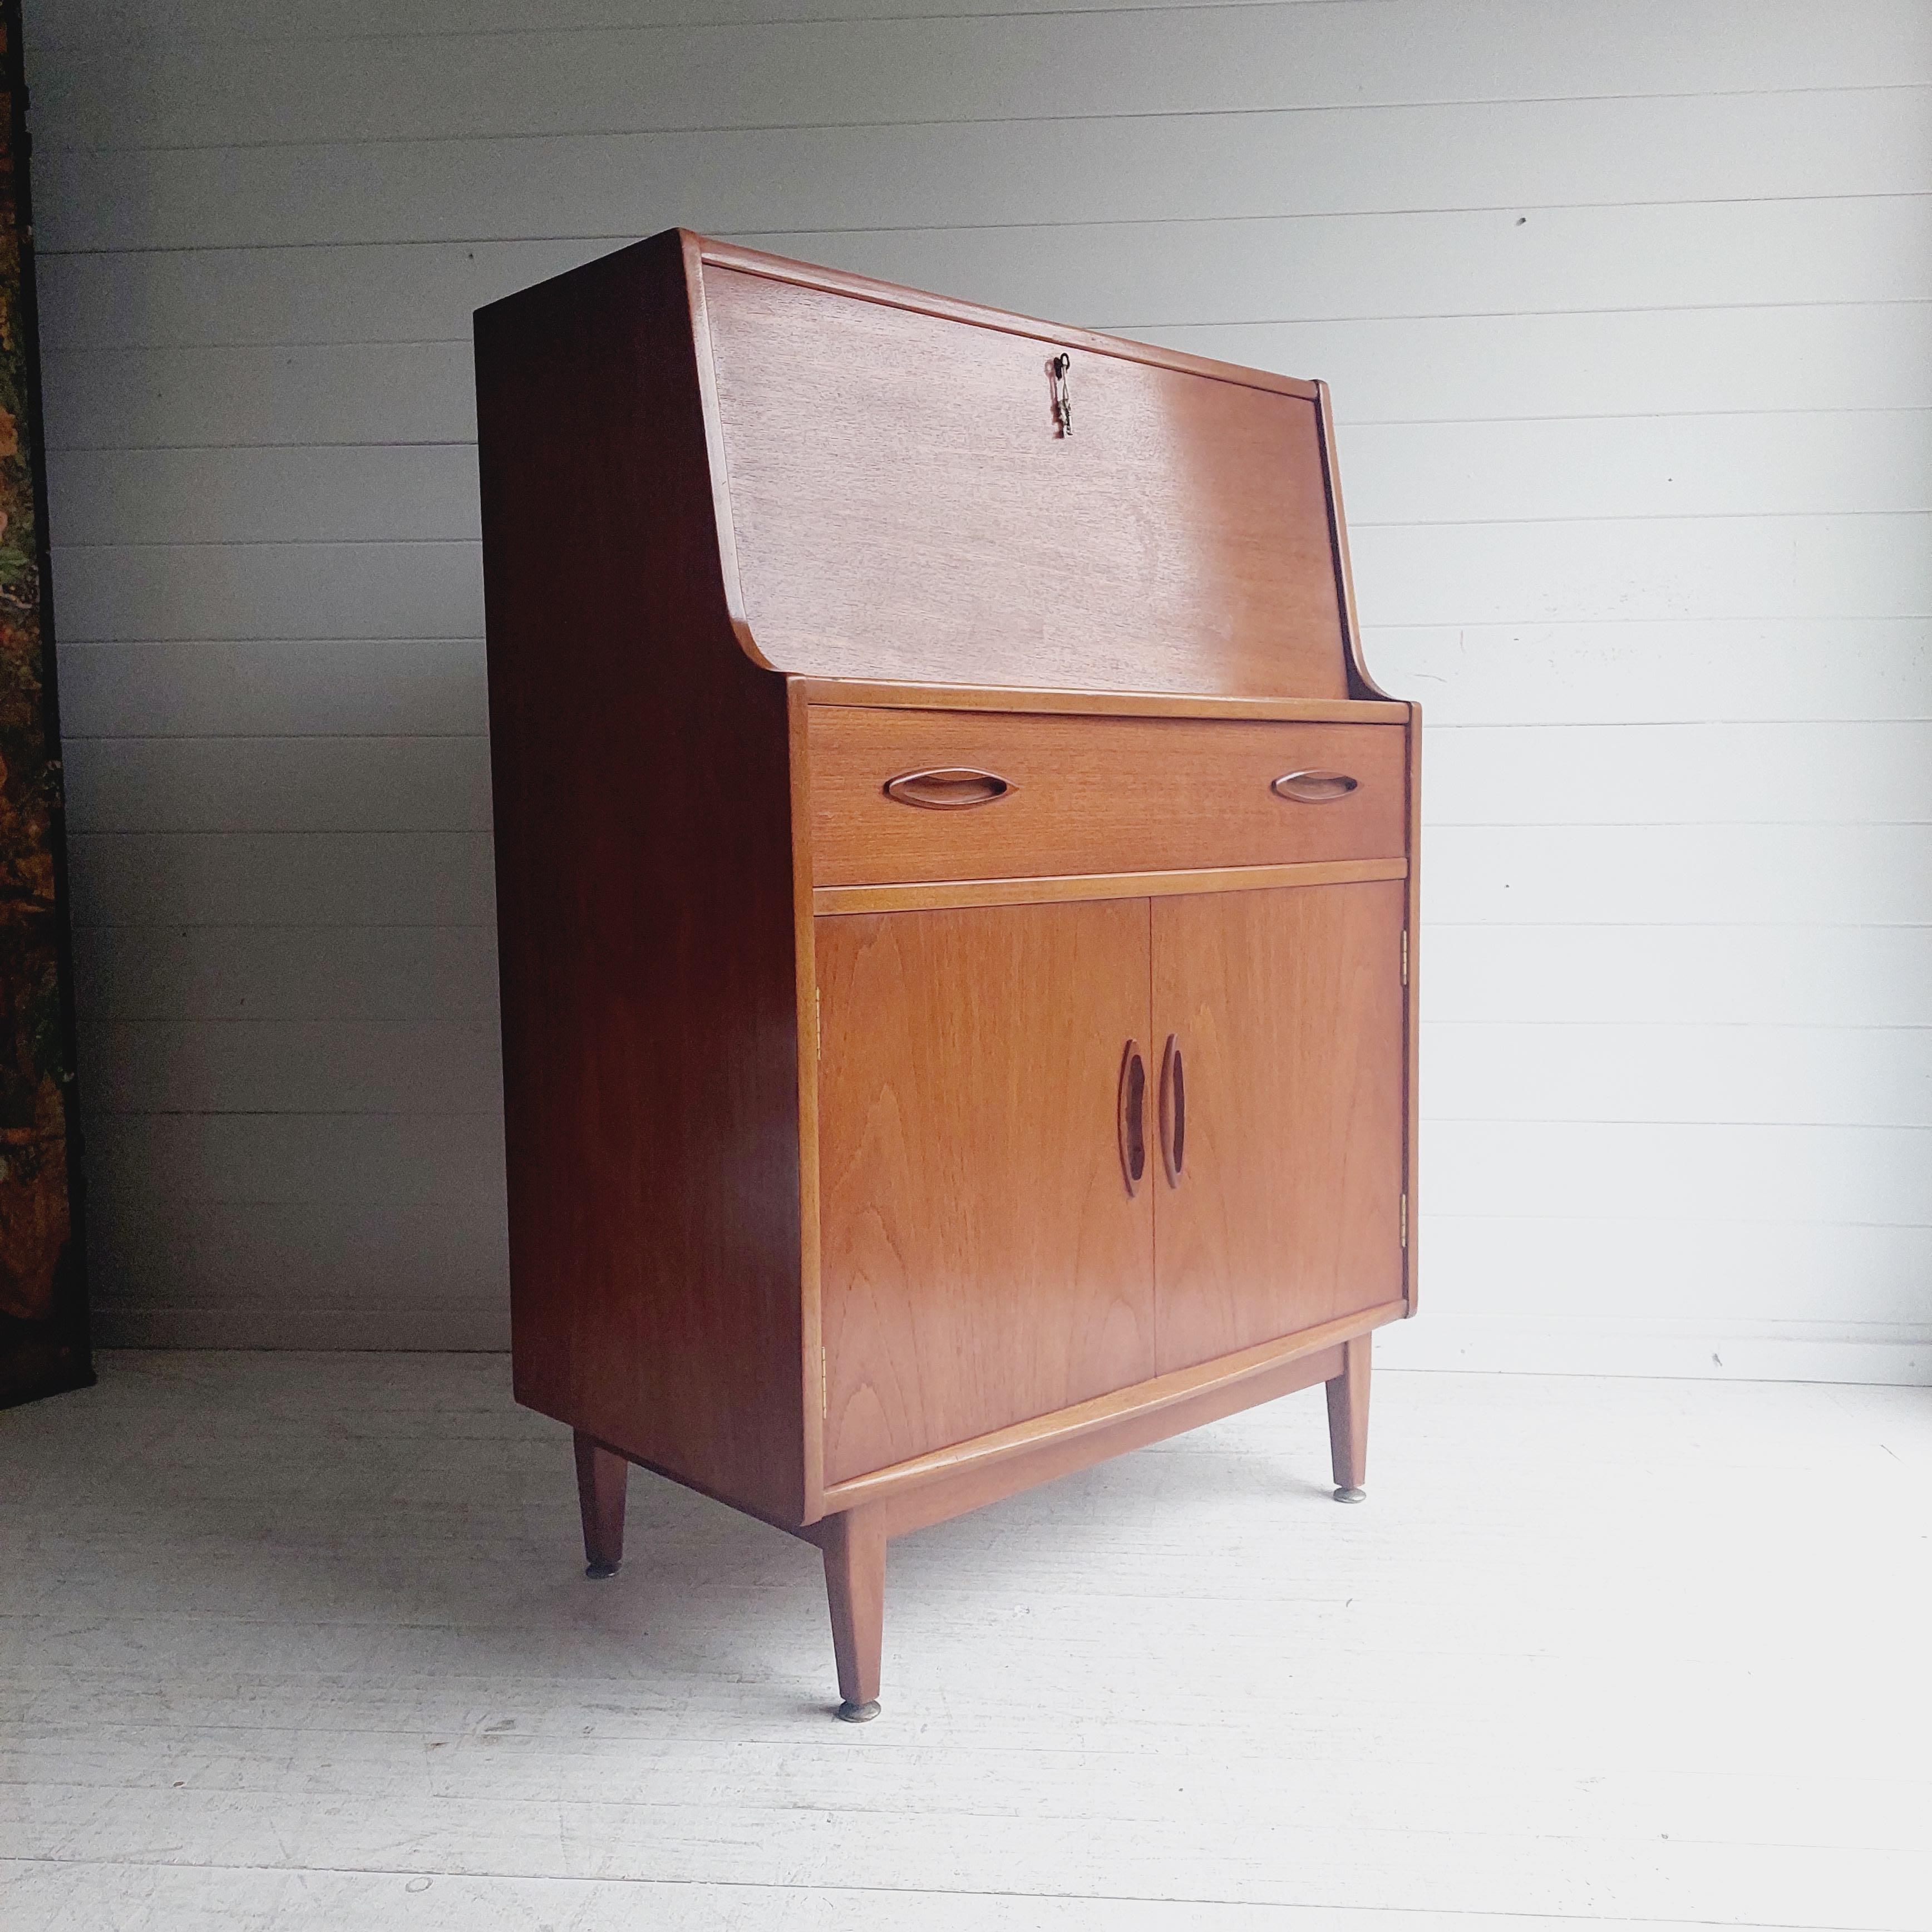 Mid Century Jentique Teak Bureau Secretaries Desk.
Designed and made in the 1960s, this Bureau is an extremely rare and collectible item, but more importantly is a stunning piece that immediately adds mid century elegance to any room.

A stunning